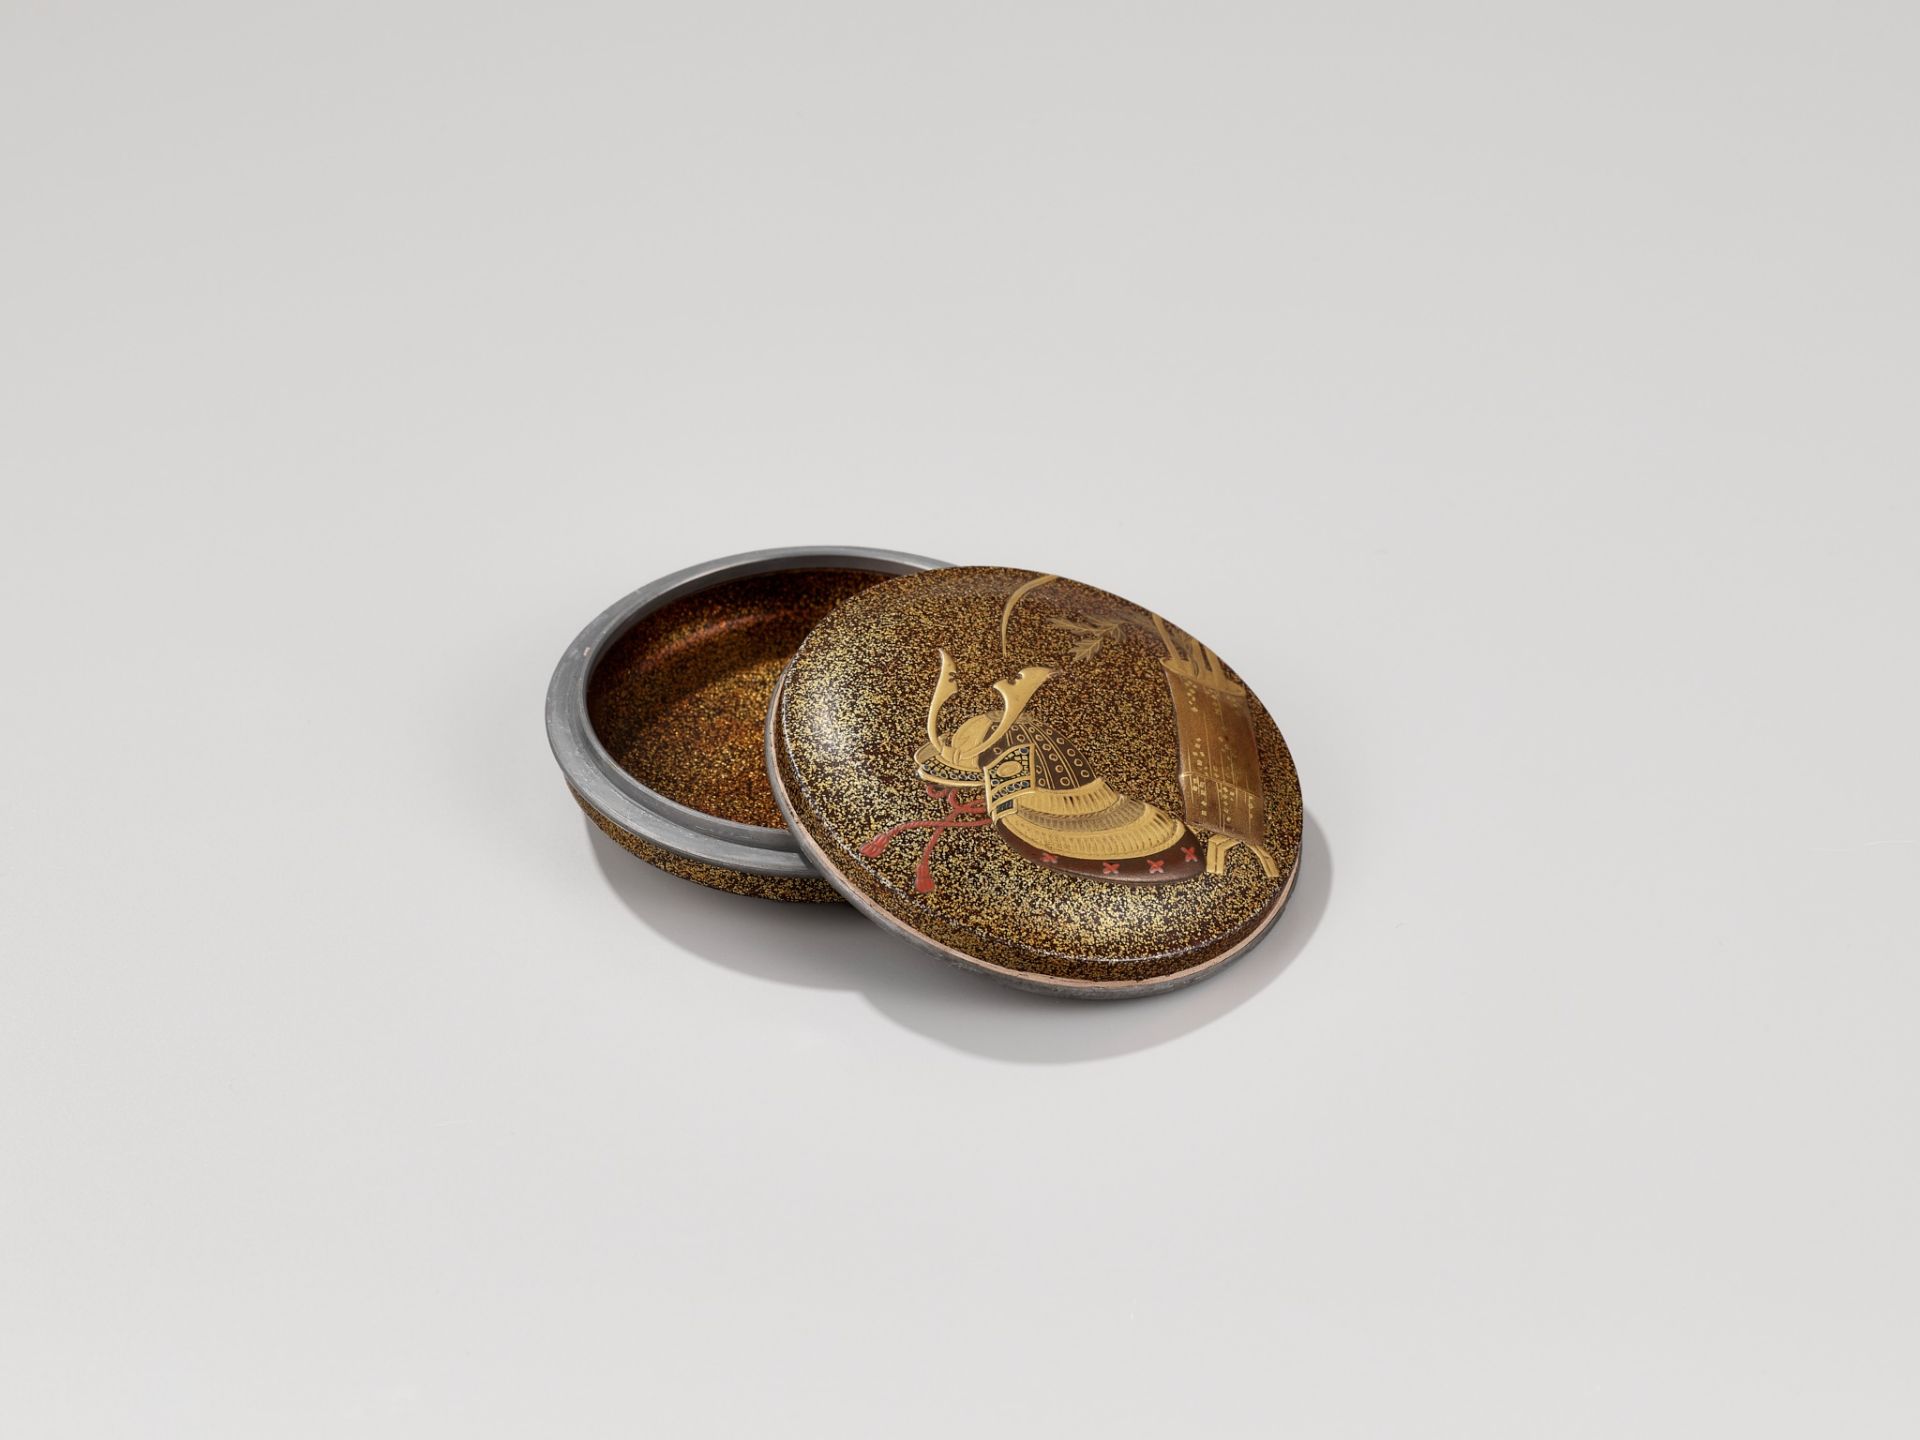 A FINE LACQUER KOGO (INCENSE BOX) AND COVER WITH KABUTO AND BAMBOO HANAKAGO - Image 3 of 7